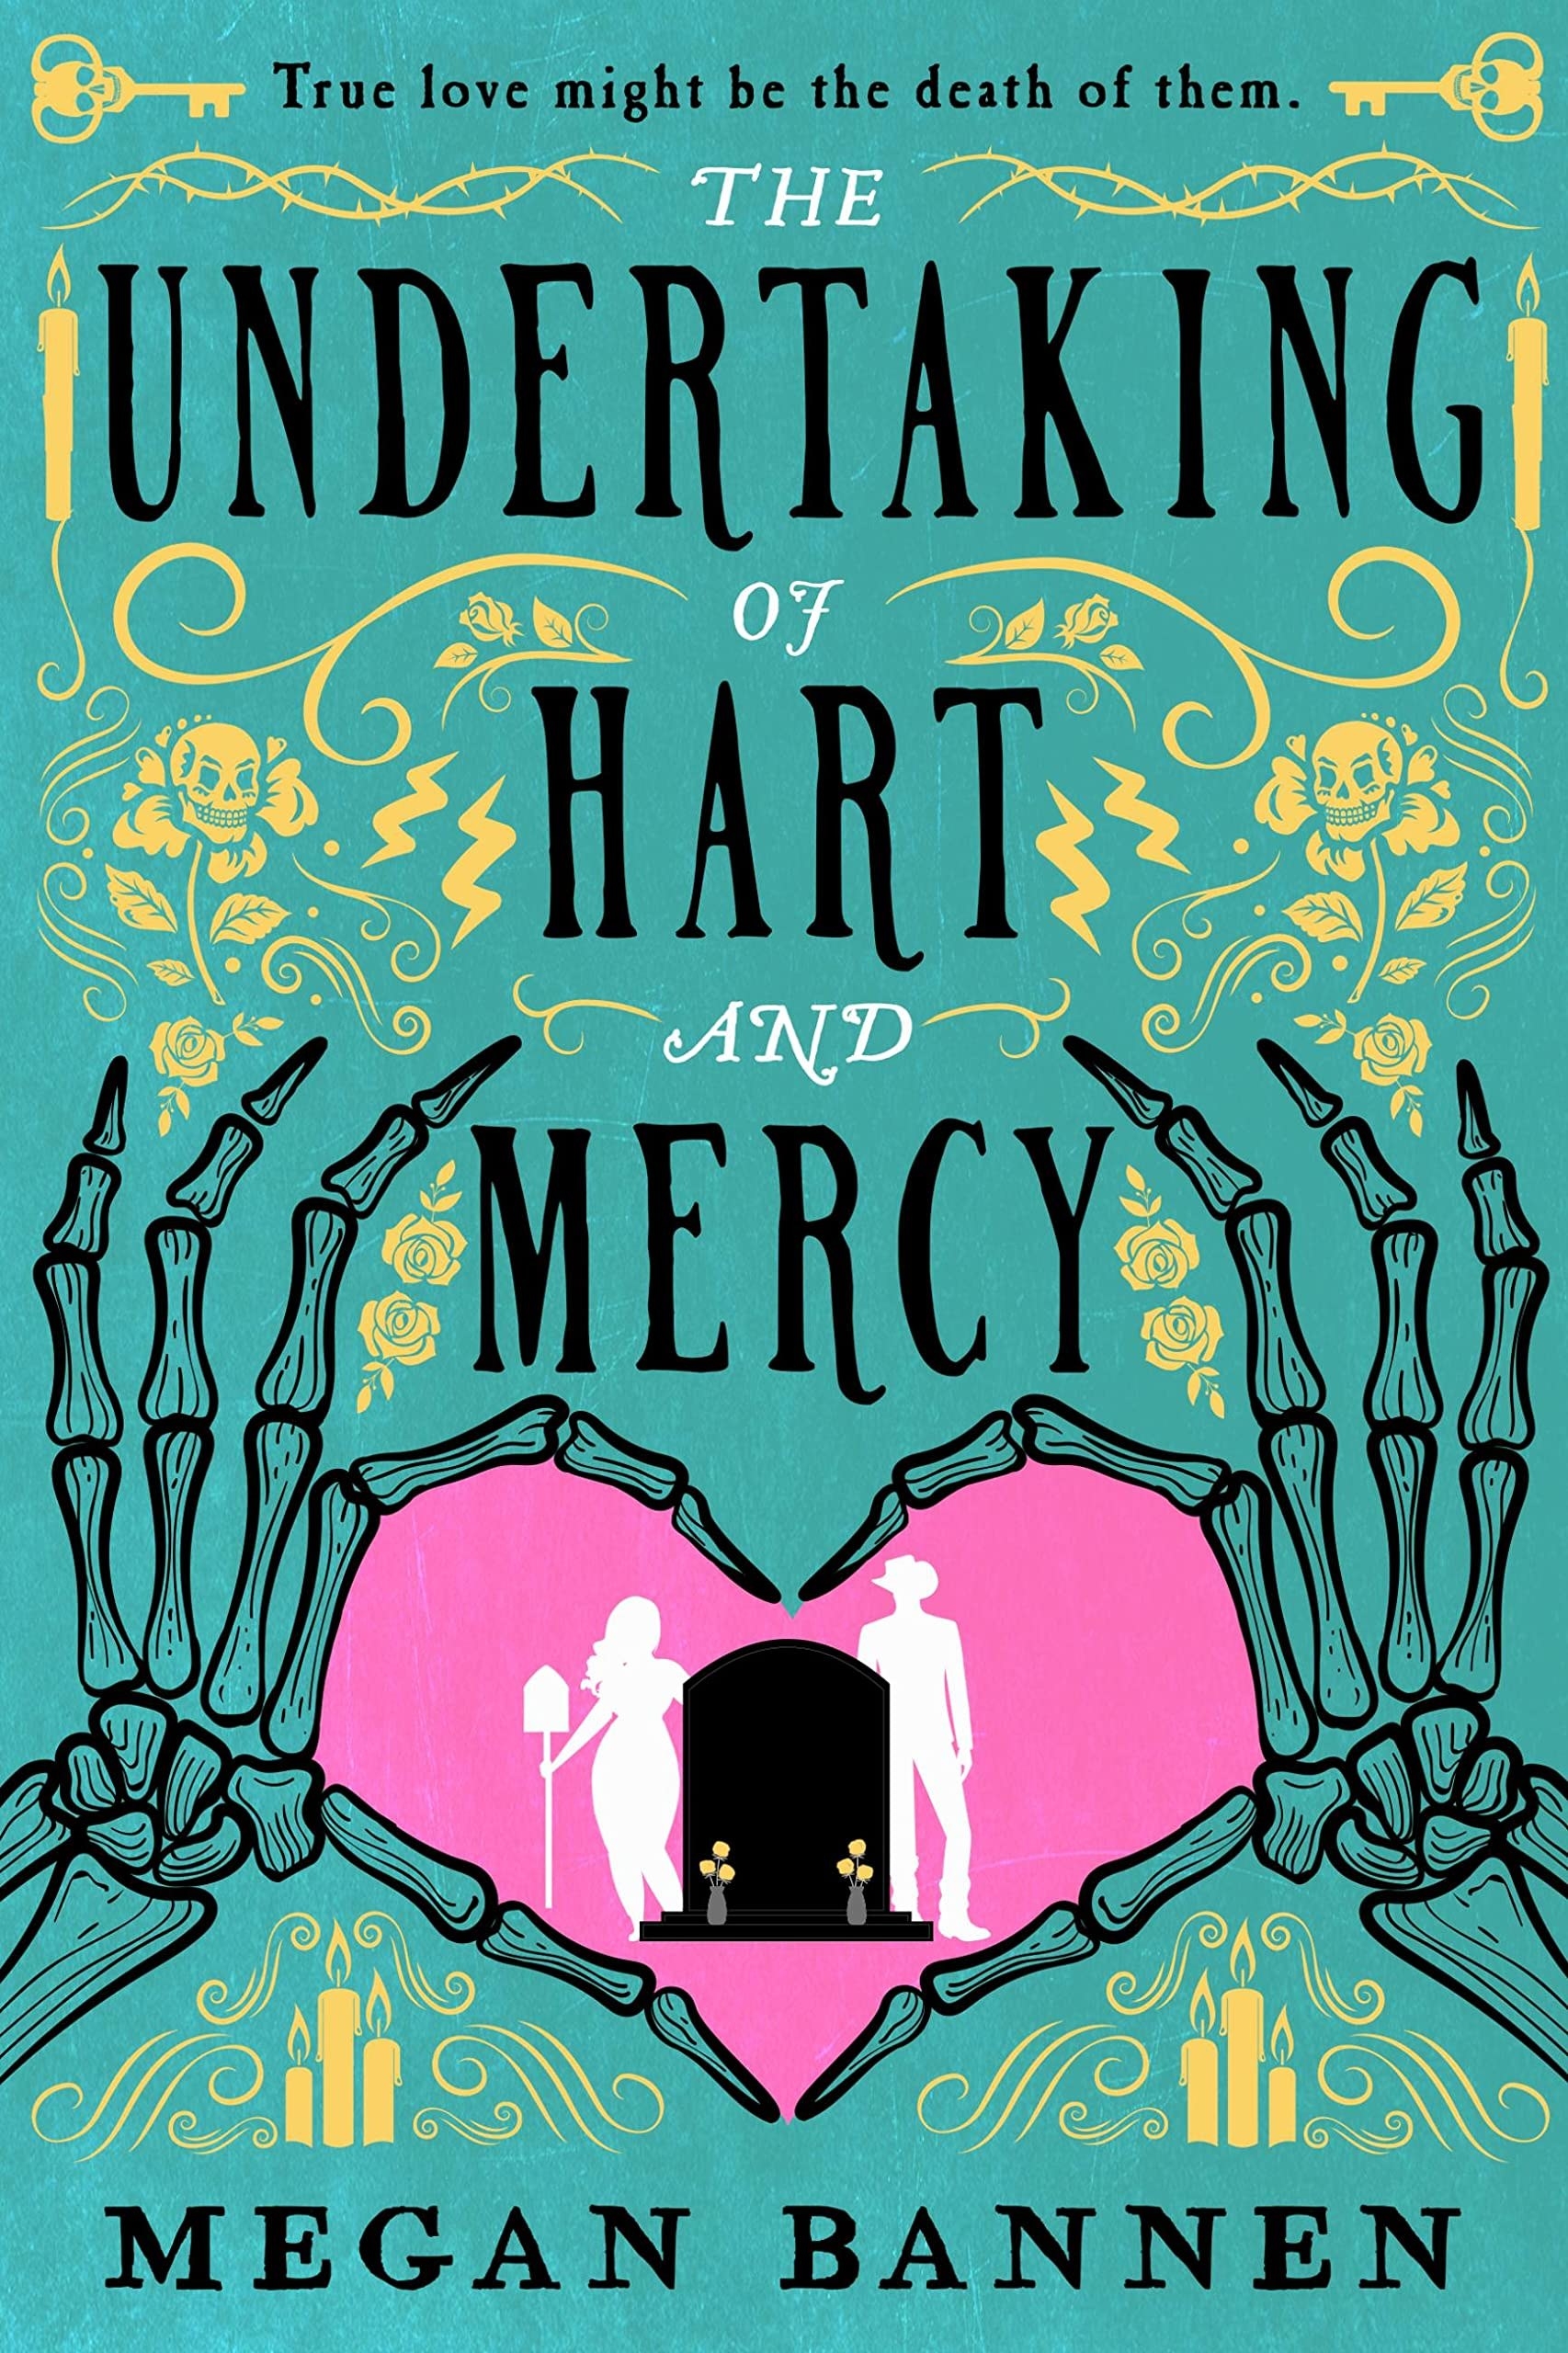 The Undertaking of Hart and Mercy cover. Book by Megan Bannen.